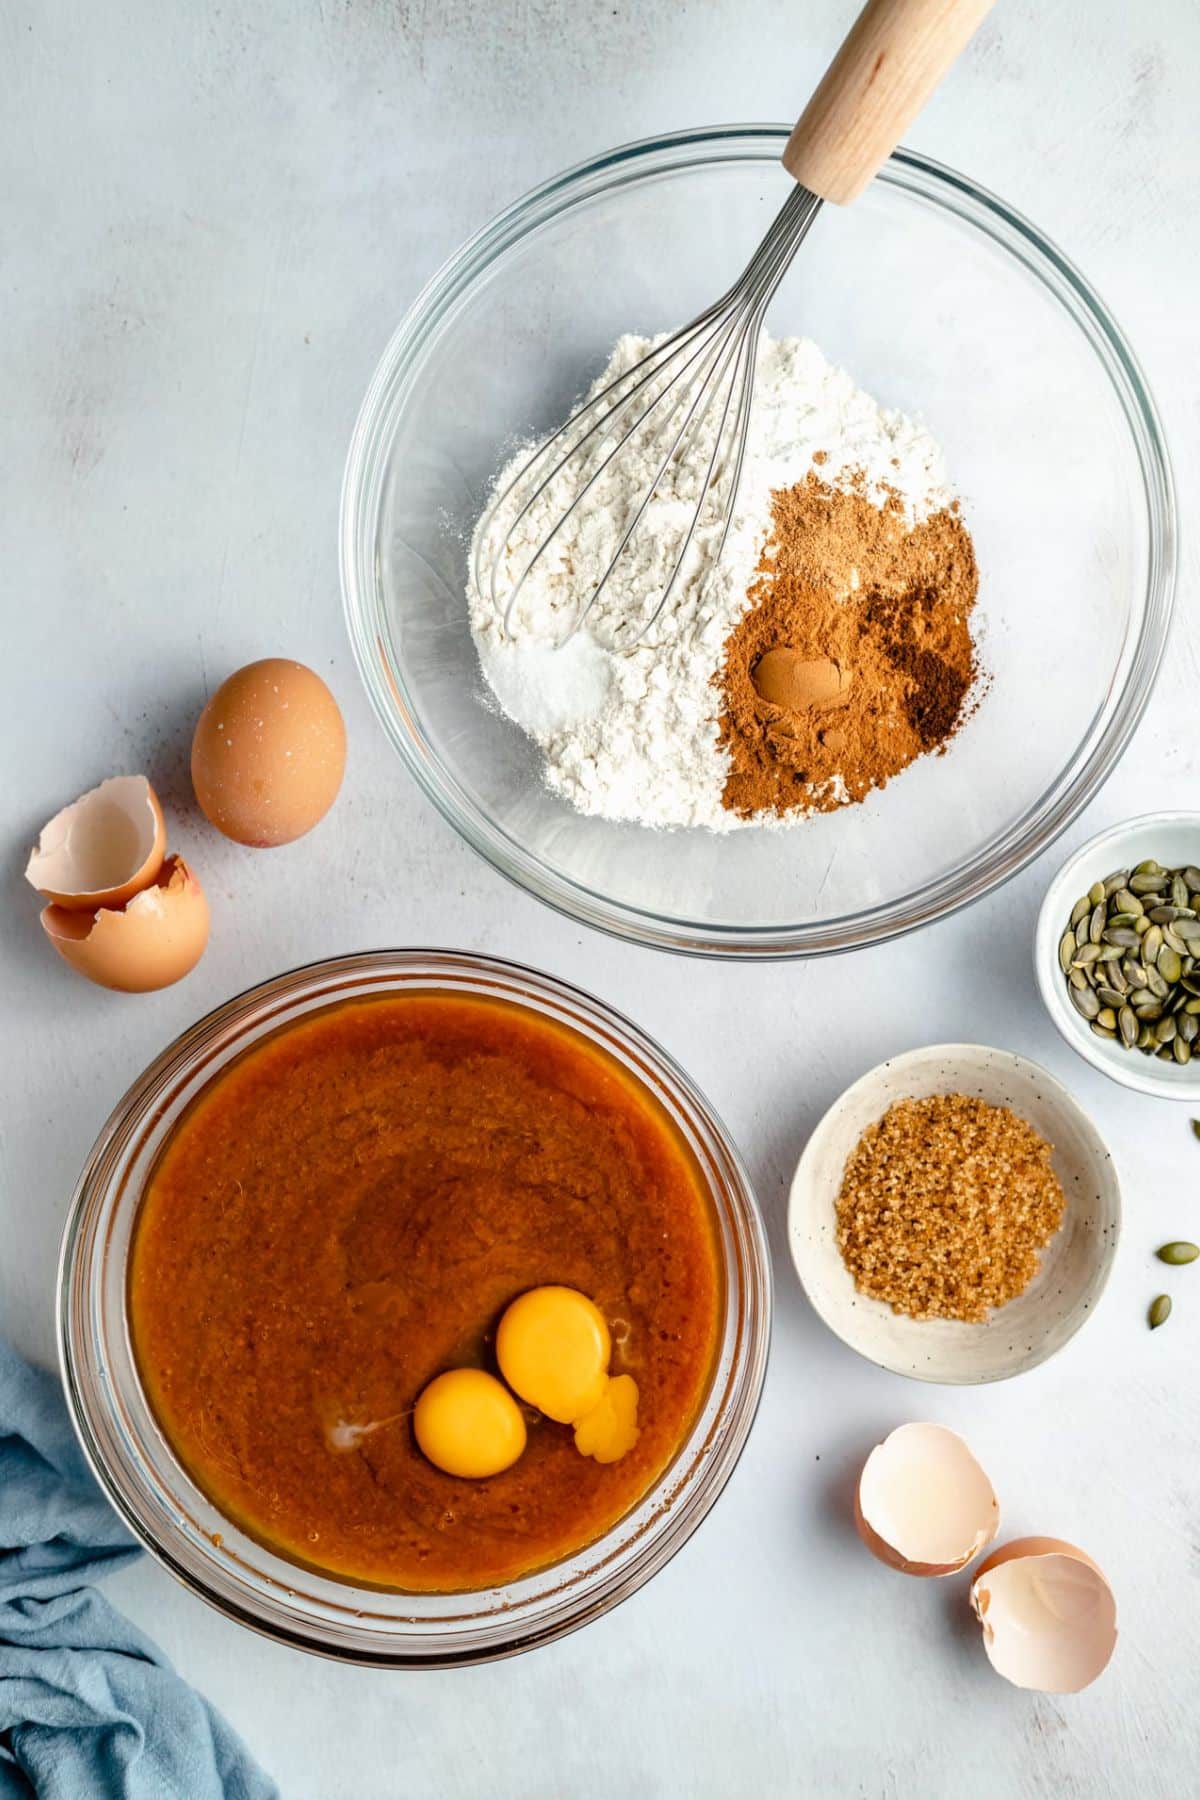 Mixing flour with spices in one bowl and eggs with oil and pumpkin in another bowl.